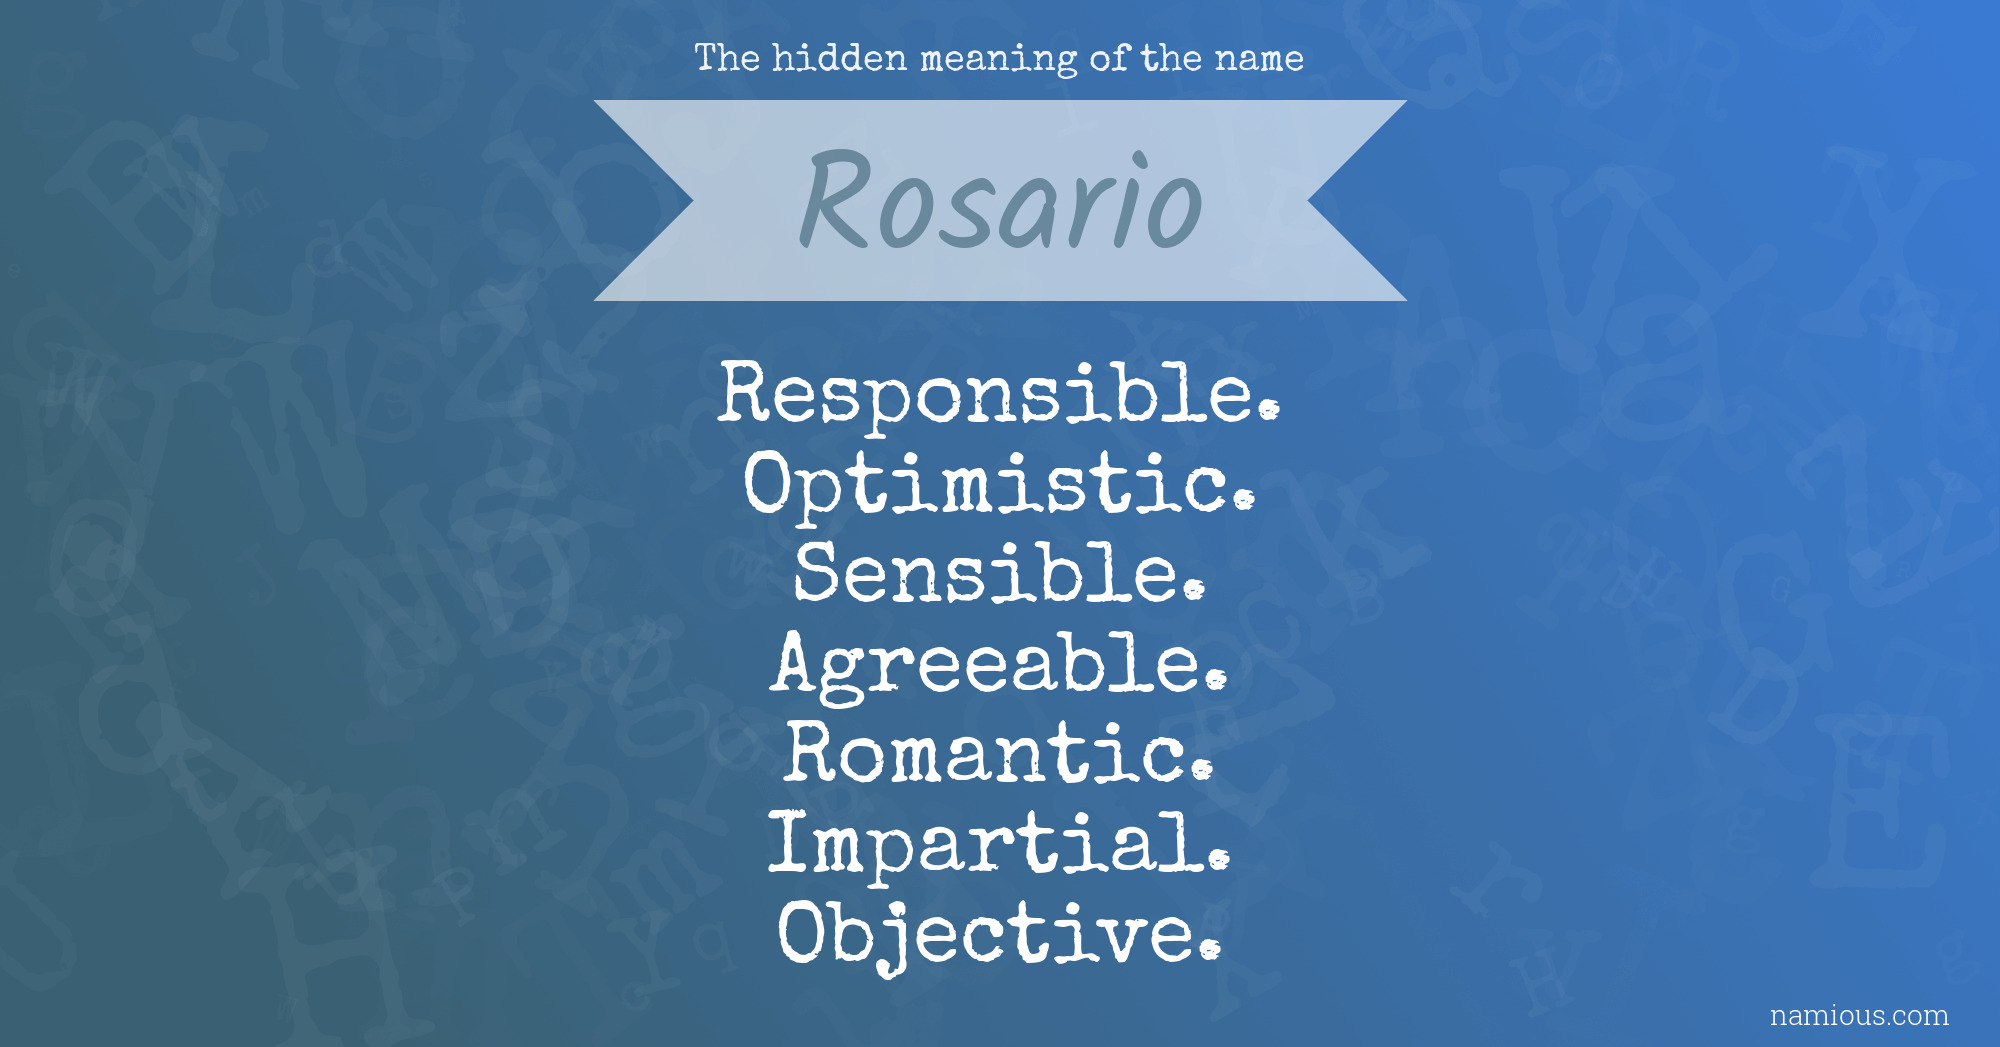 The hidden meaning of the name Rosario